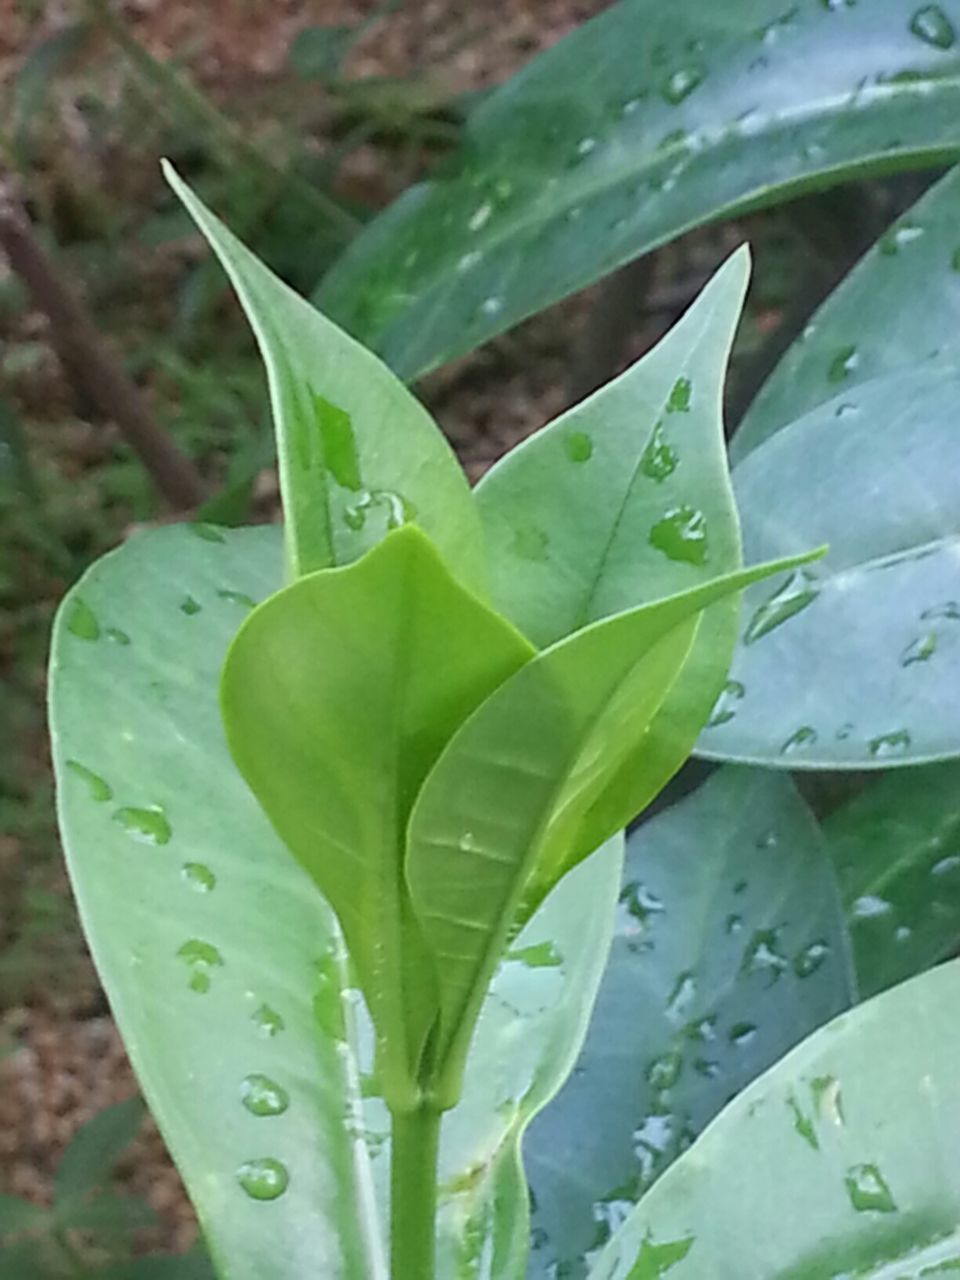 leaf, green color, close-up, water, growth, plant, nature, leaf vein, drop, focus on foreground, freshness, leaves, wet, green, beauty in nature, fragility, day, outdoors, high angle view, no people